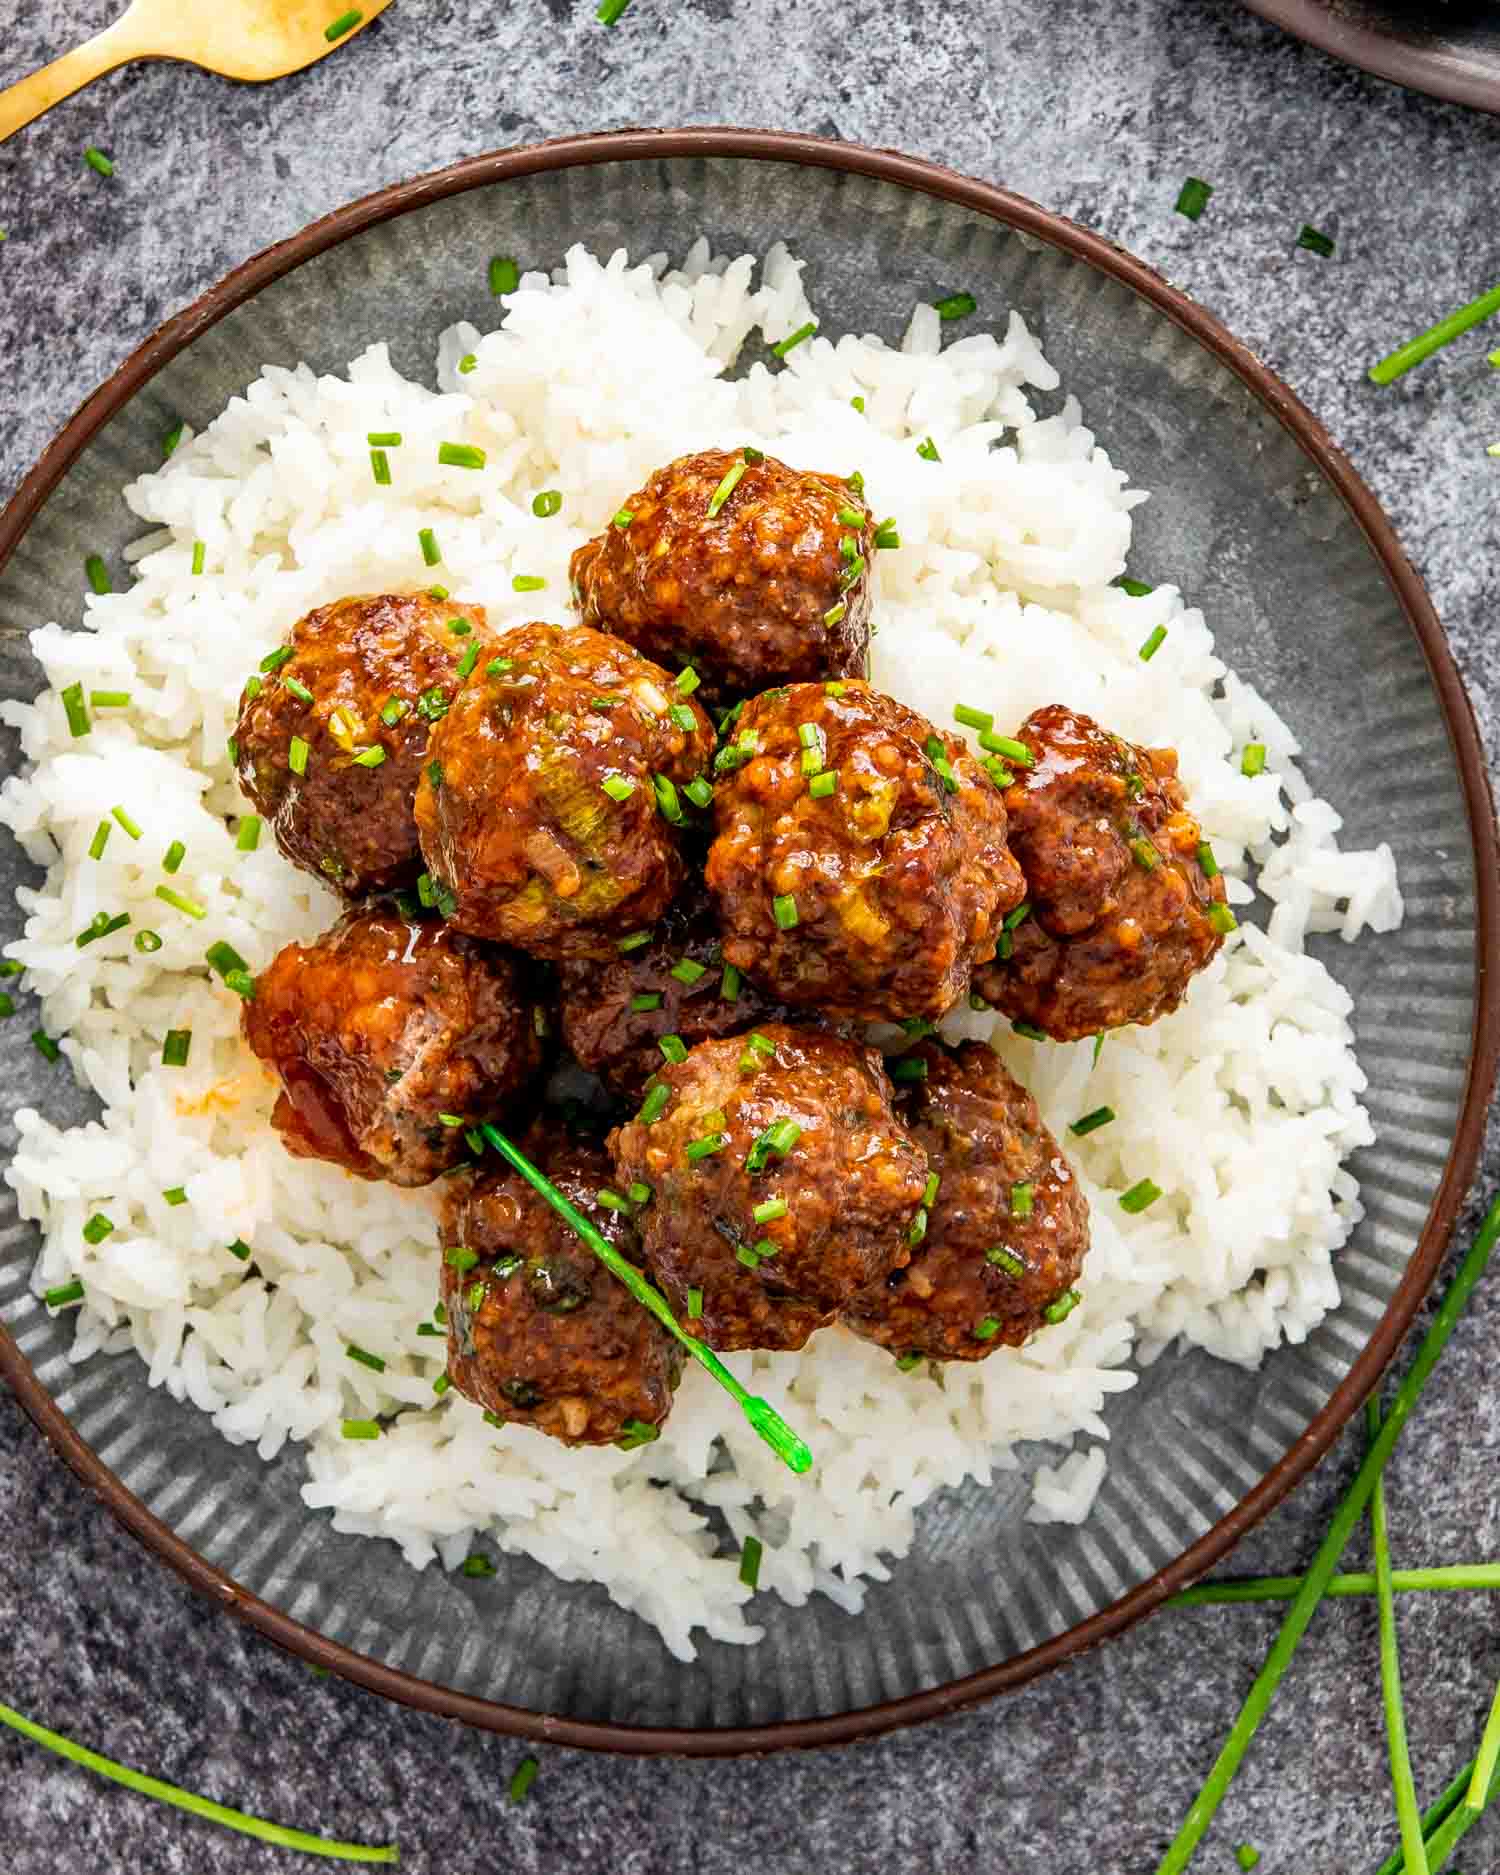 korean meatballs on a metal plate on a bed of rice garnished with chives.